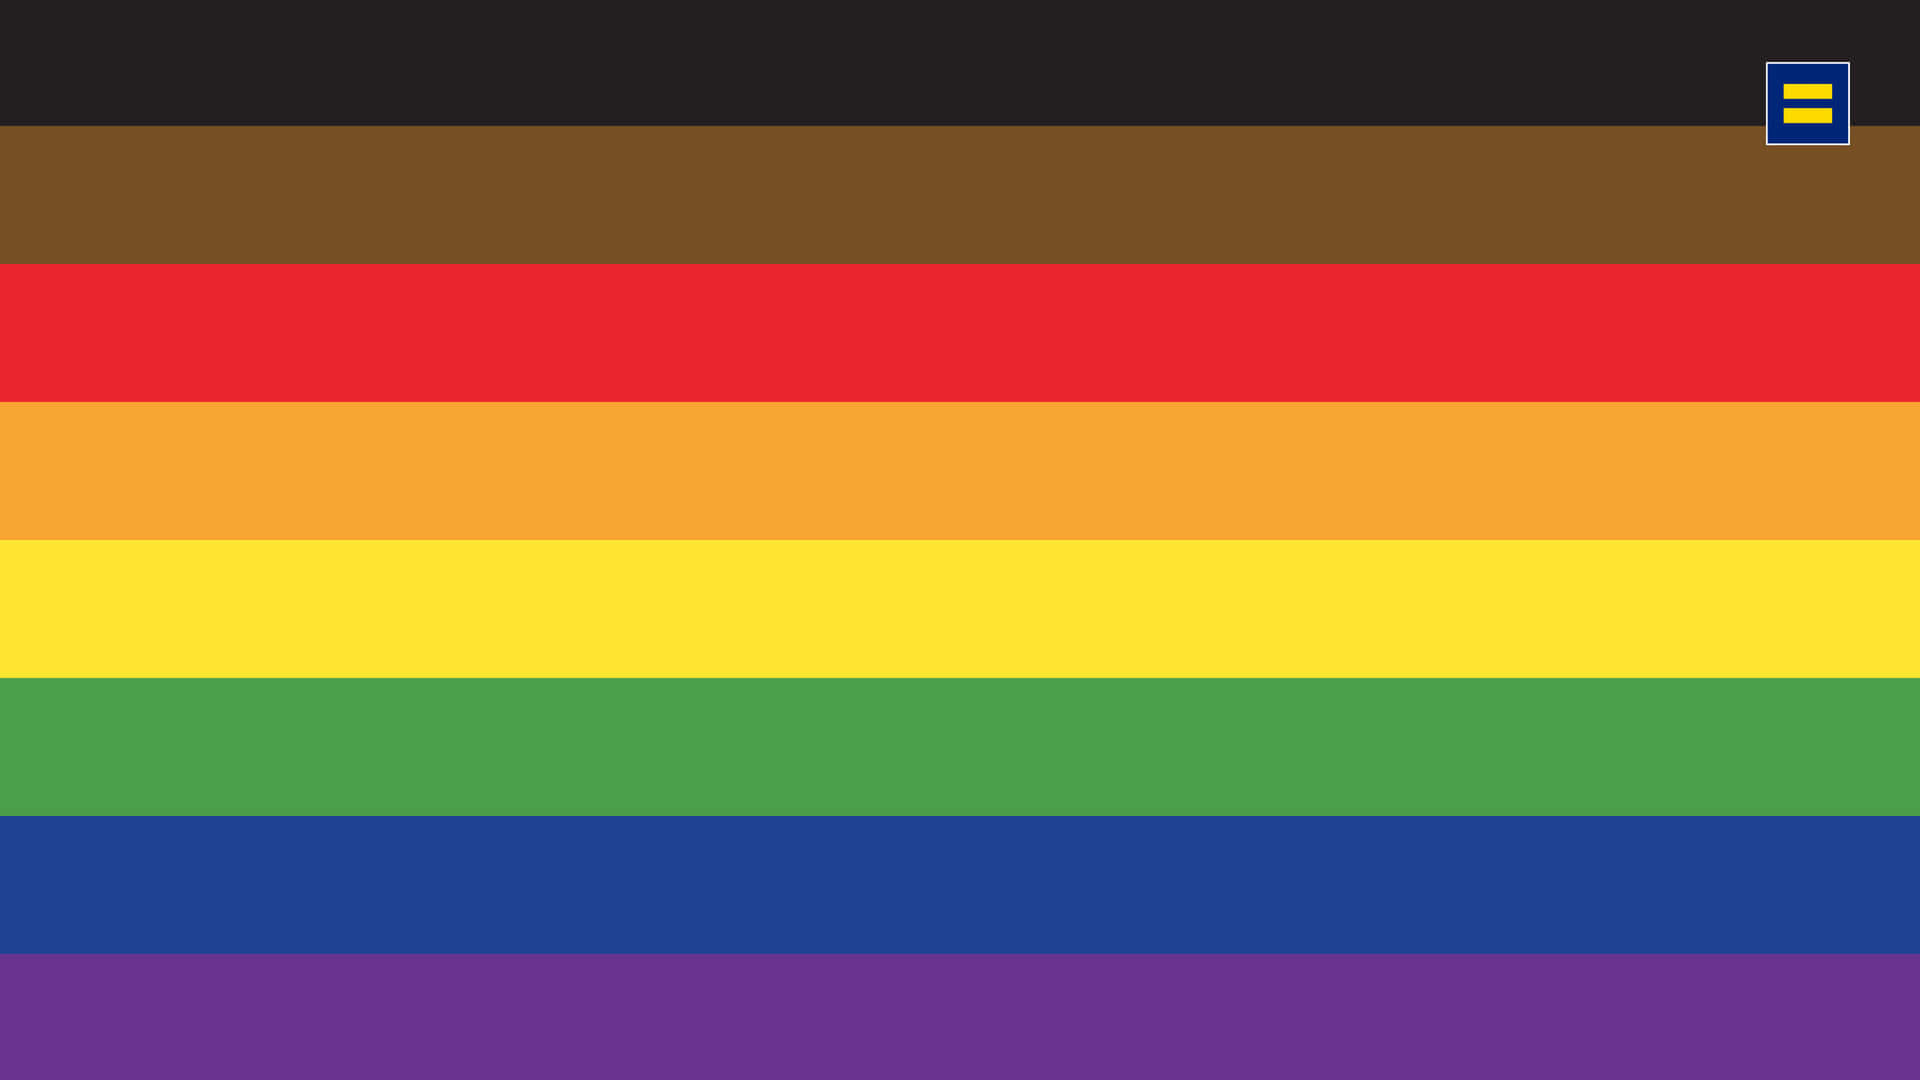 Show your pride year-round with this beautiful, colorful Pride Flag!